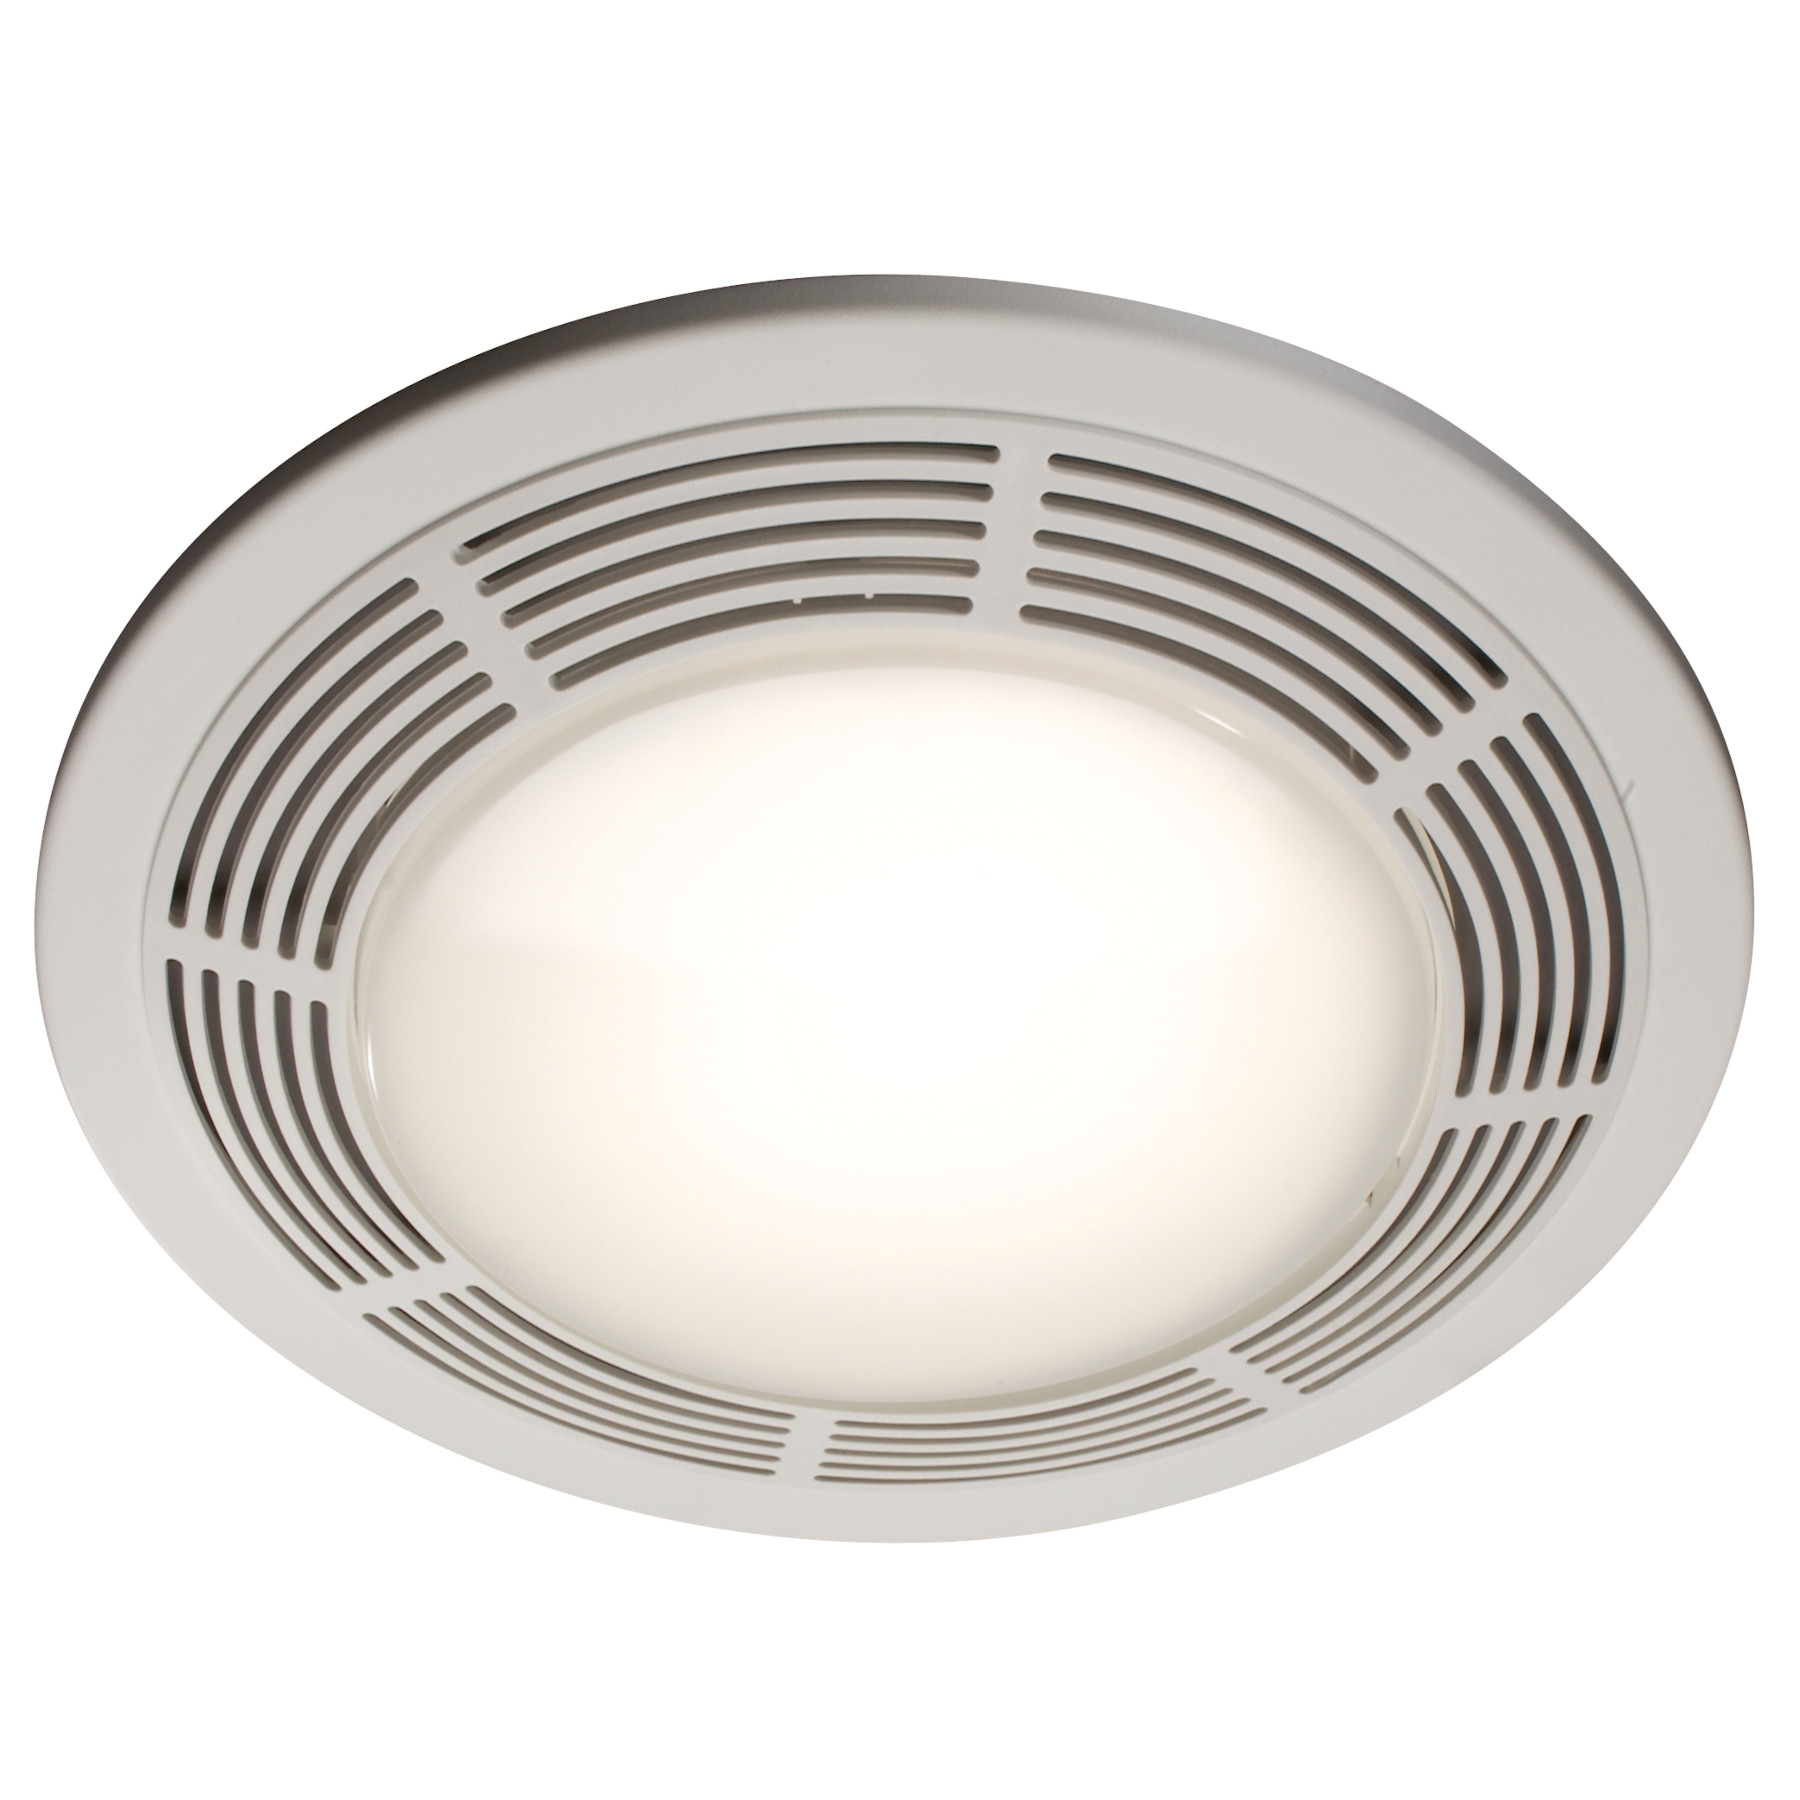 8664rp Nutone Ventilation Fan W Incandescent Lighting with regard to proportions 1800 X 1800